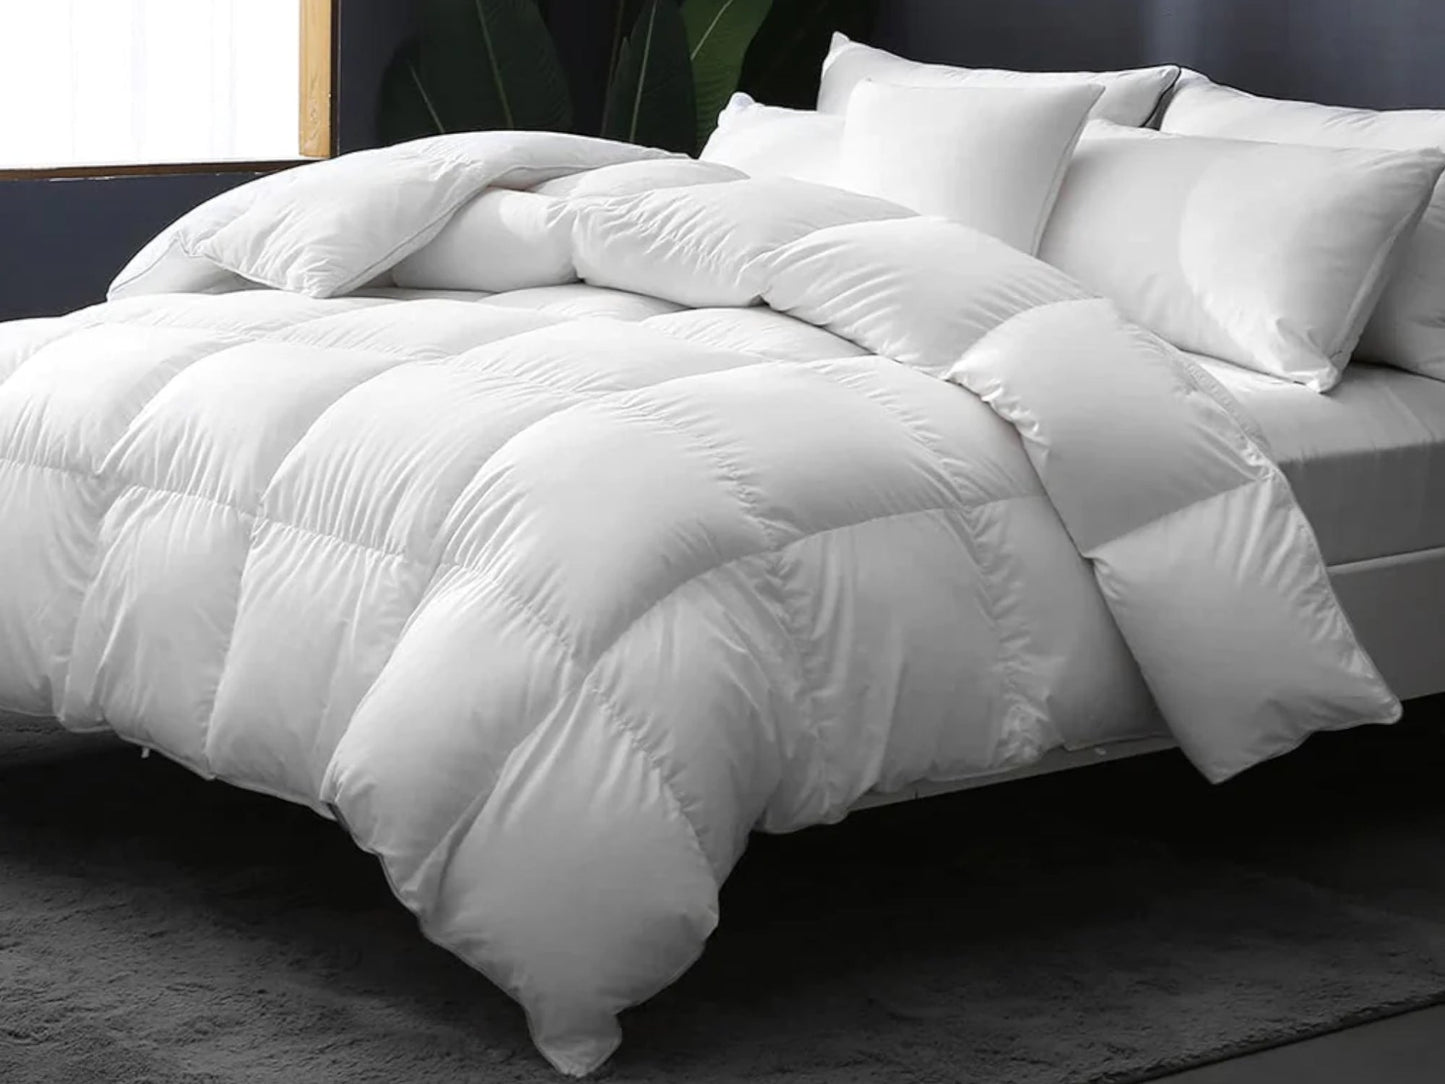 Luxury Duck Feather & Down Natural Duvet 13.5 and 10.5 Tog